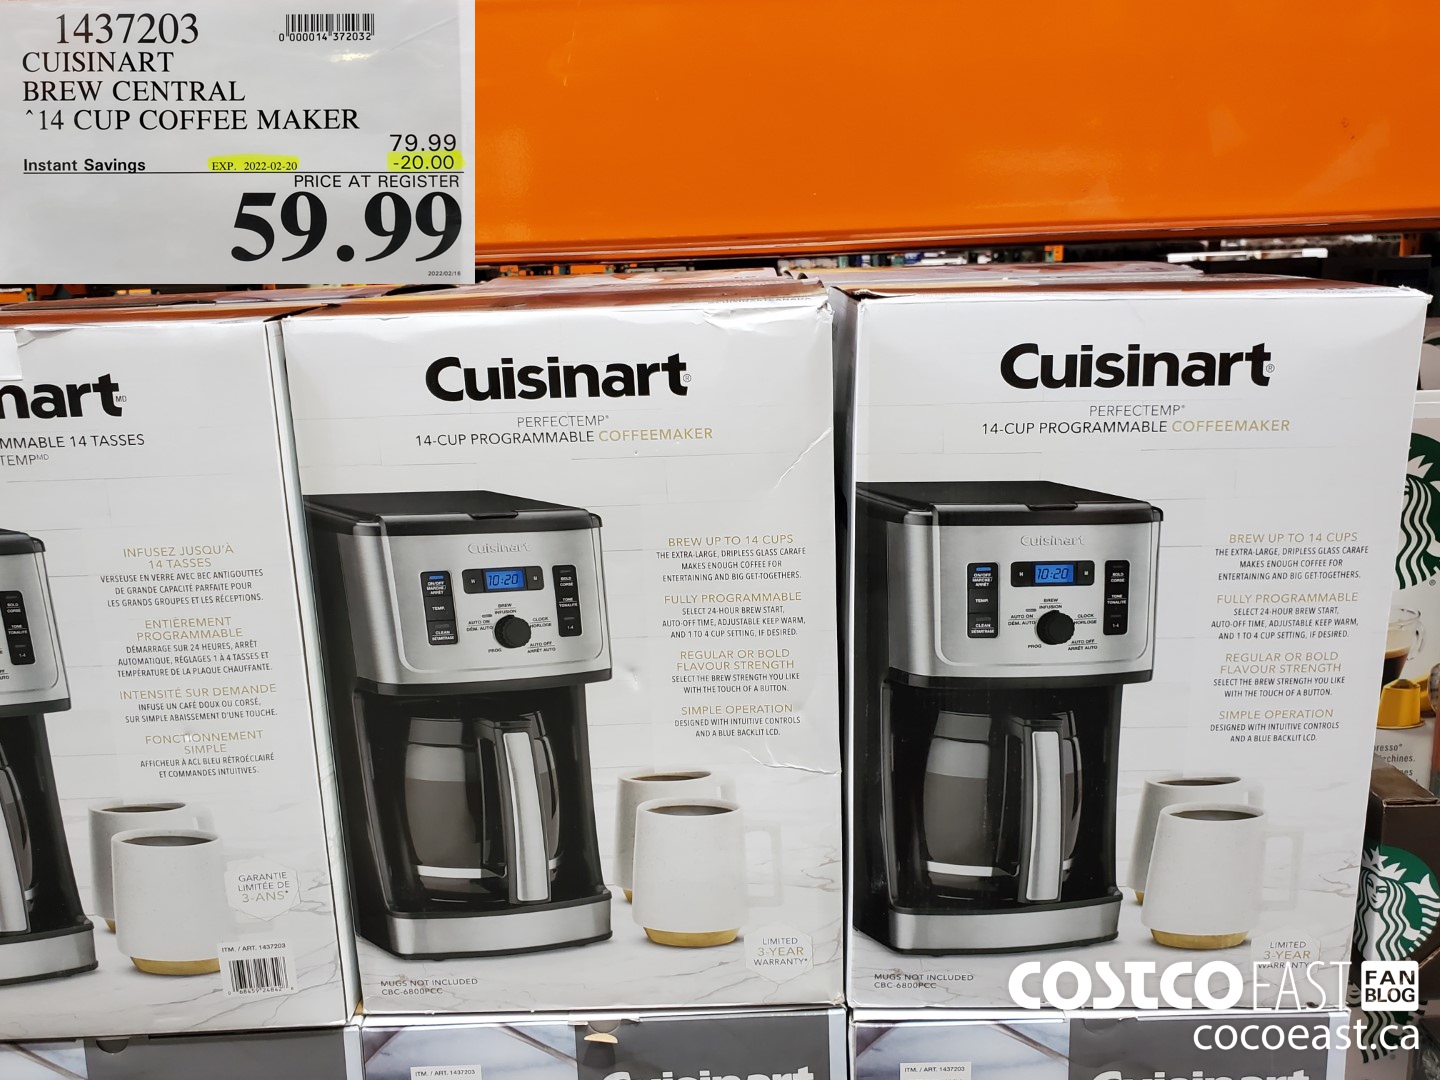 https://east.cocowest1.ca/uploads/2022/02/CUISINART_BREW_CENTRAL_14_CUP_COFFEE_MAKER_20220218_50310.jpg